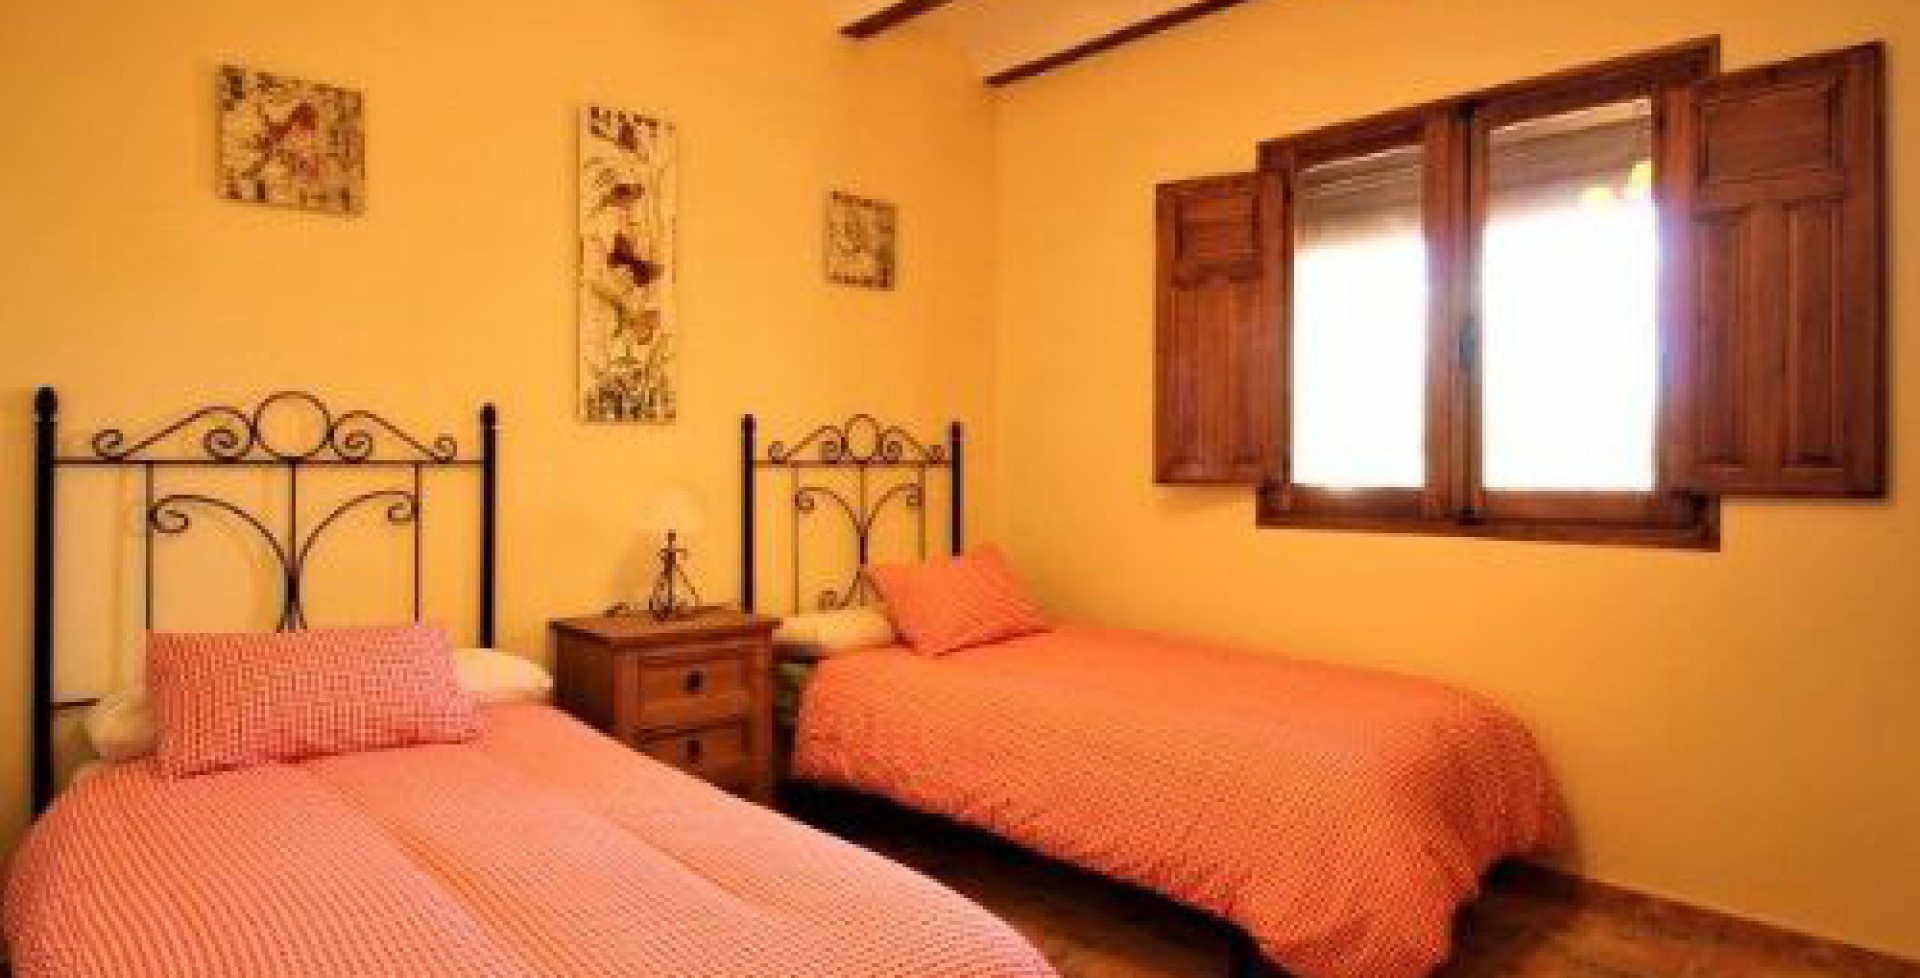 amazing detached country house with a beatiful bedroom with 2 beds